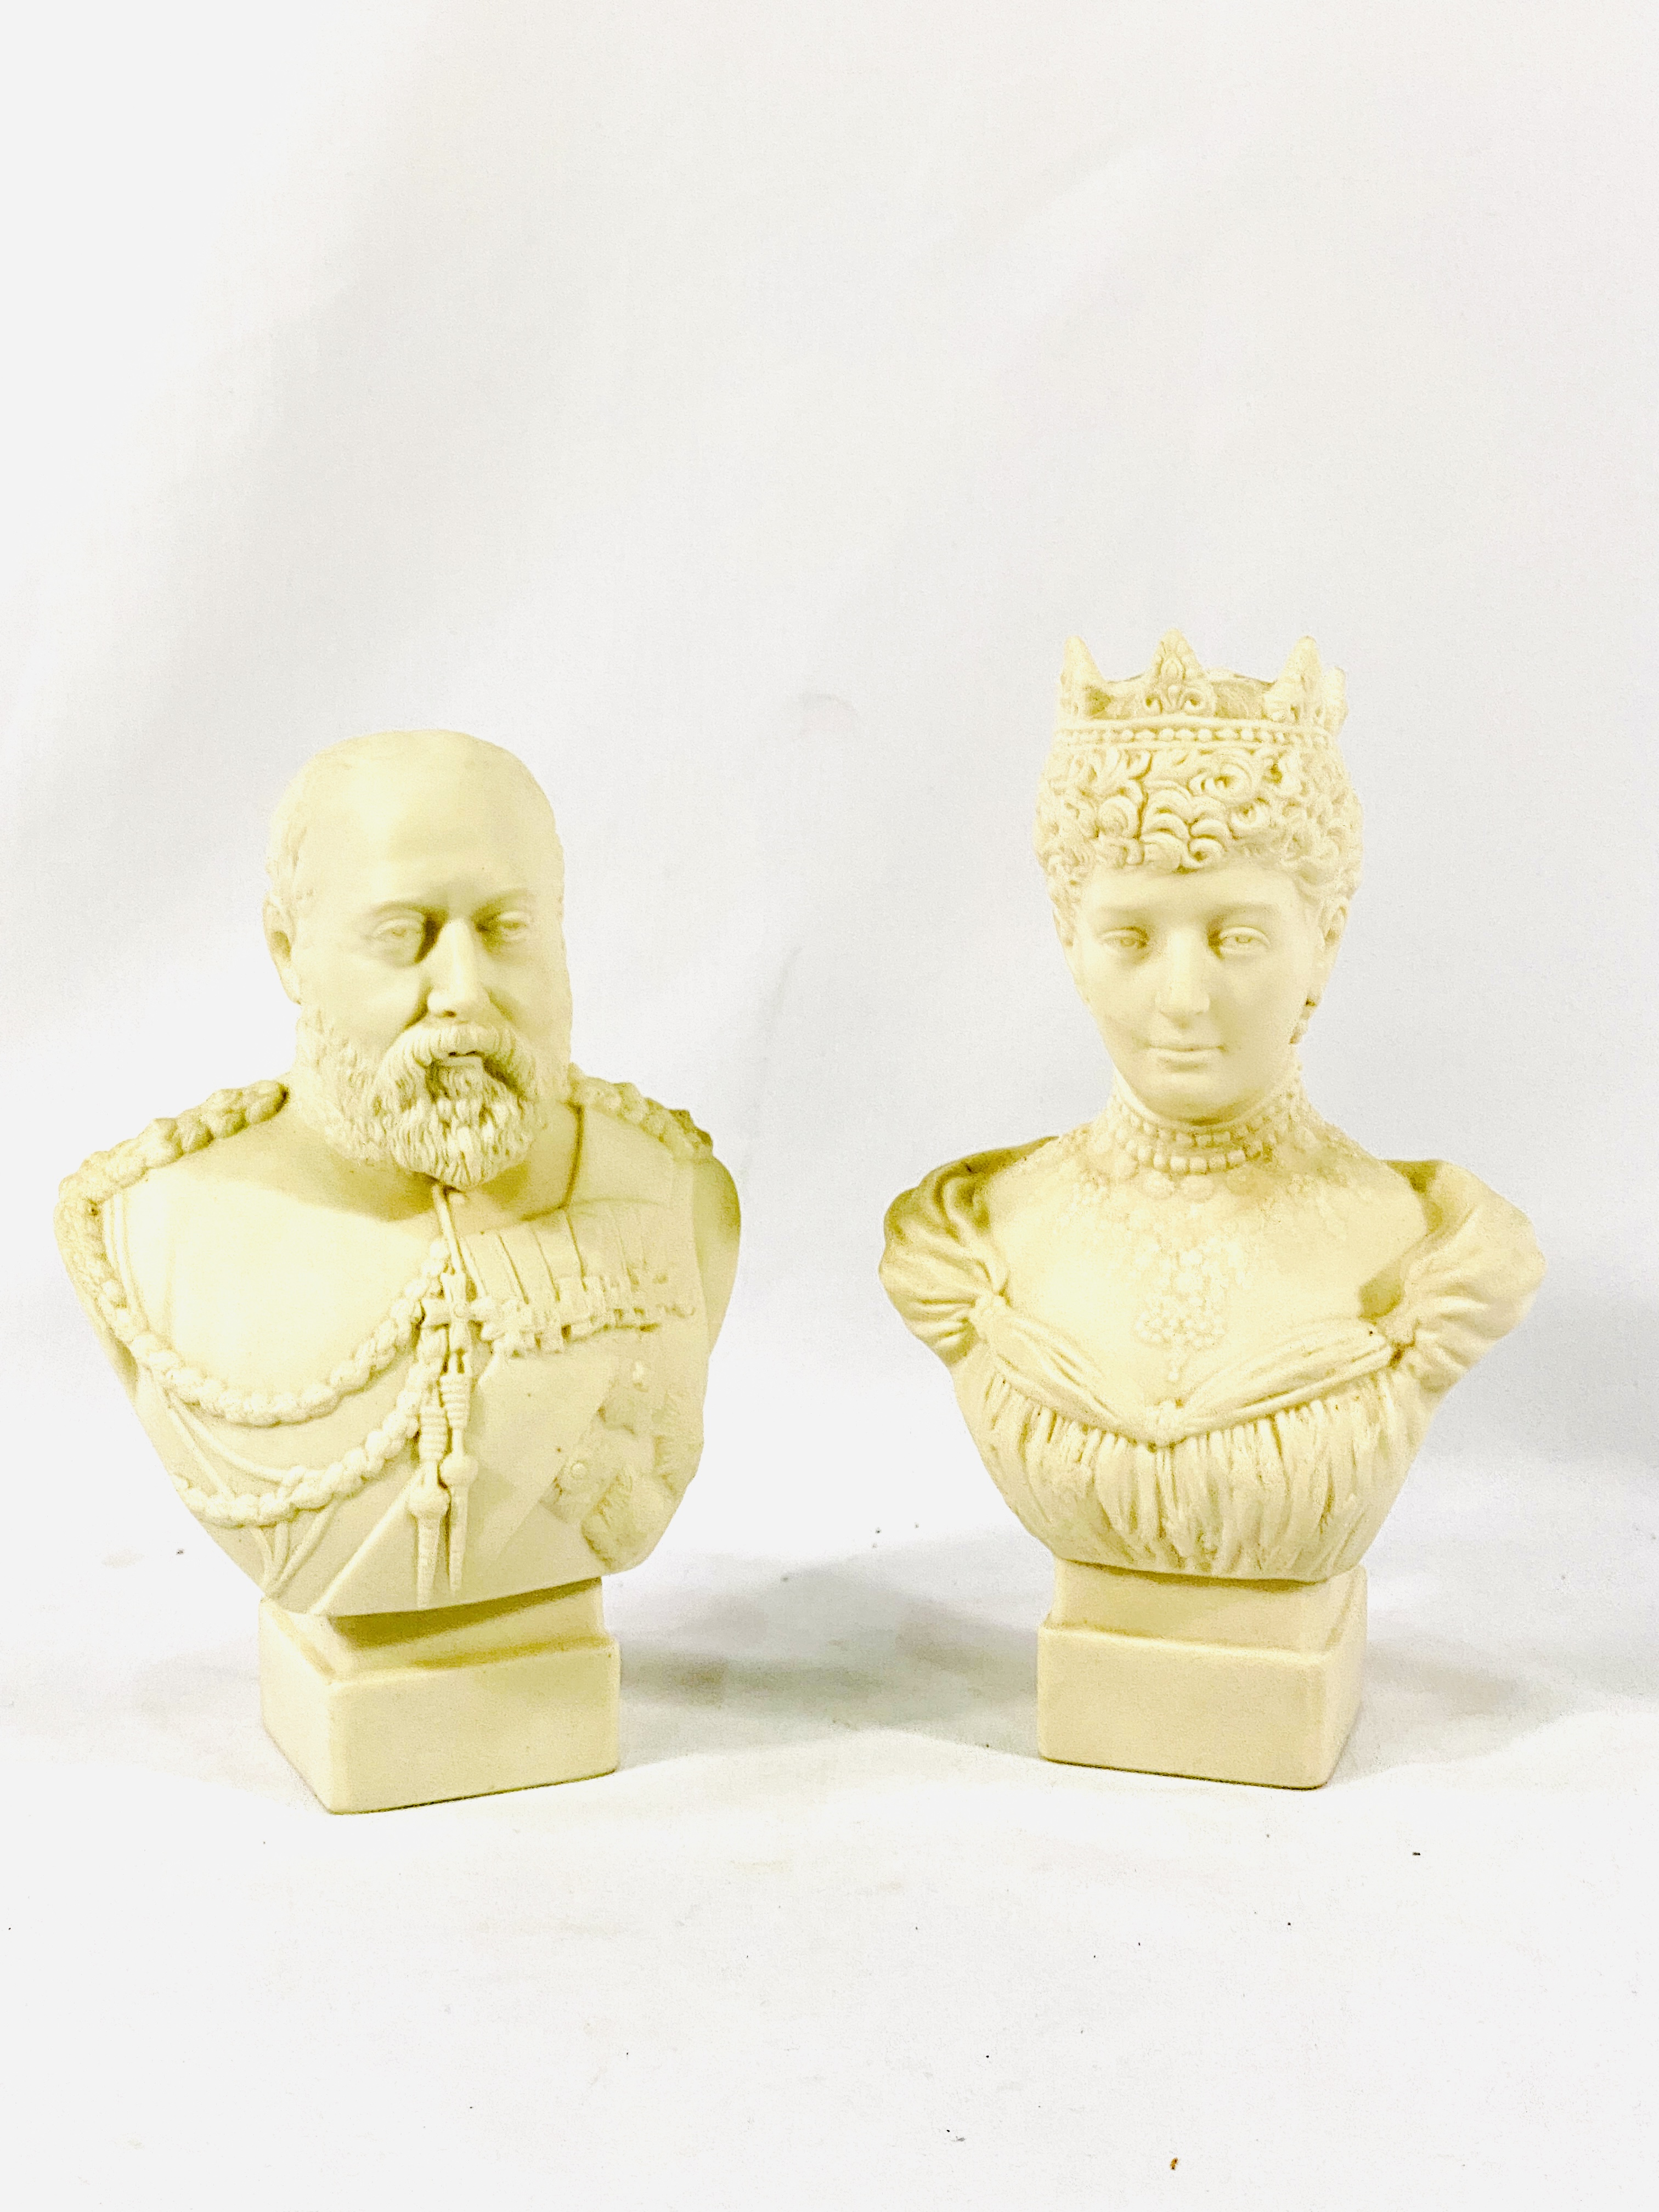 Two parian busts modelled by W.C. Lawton